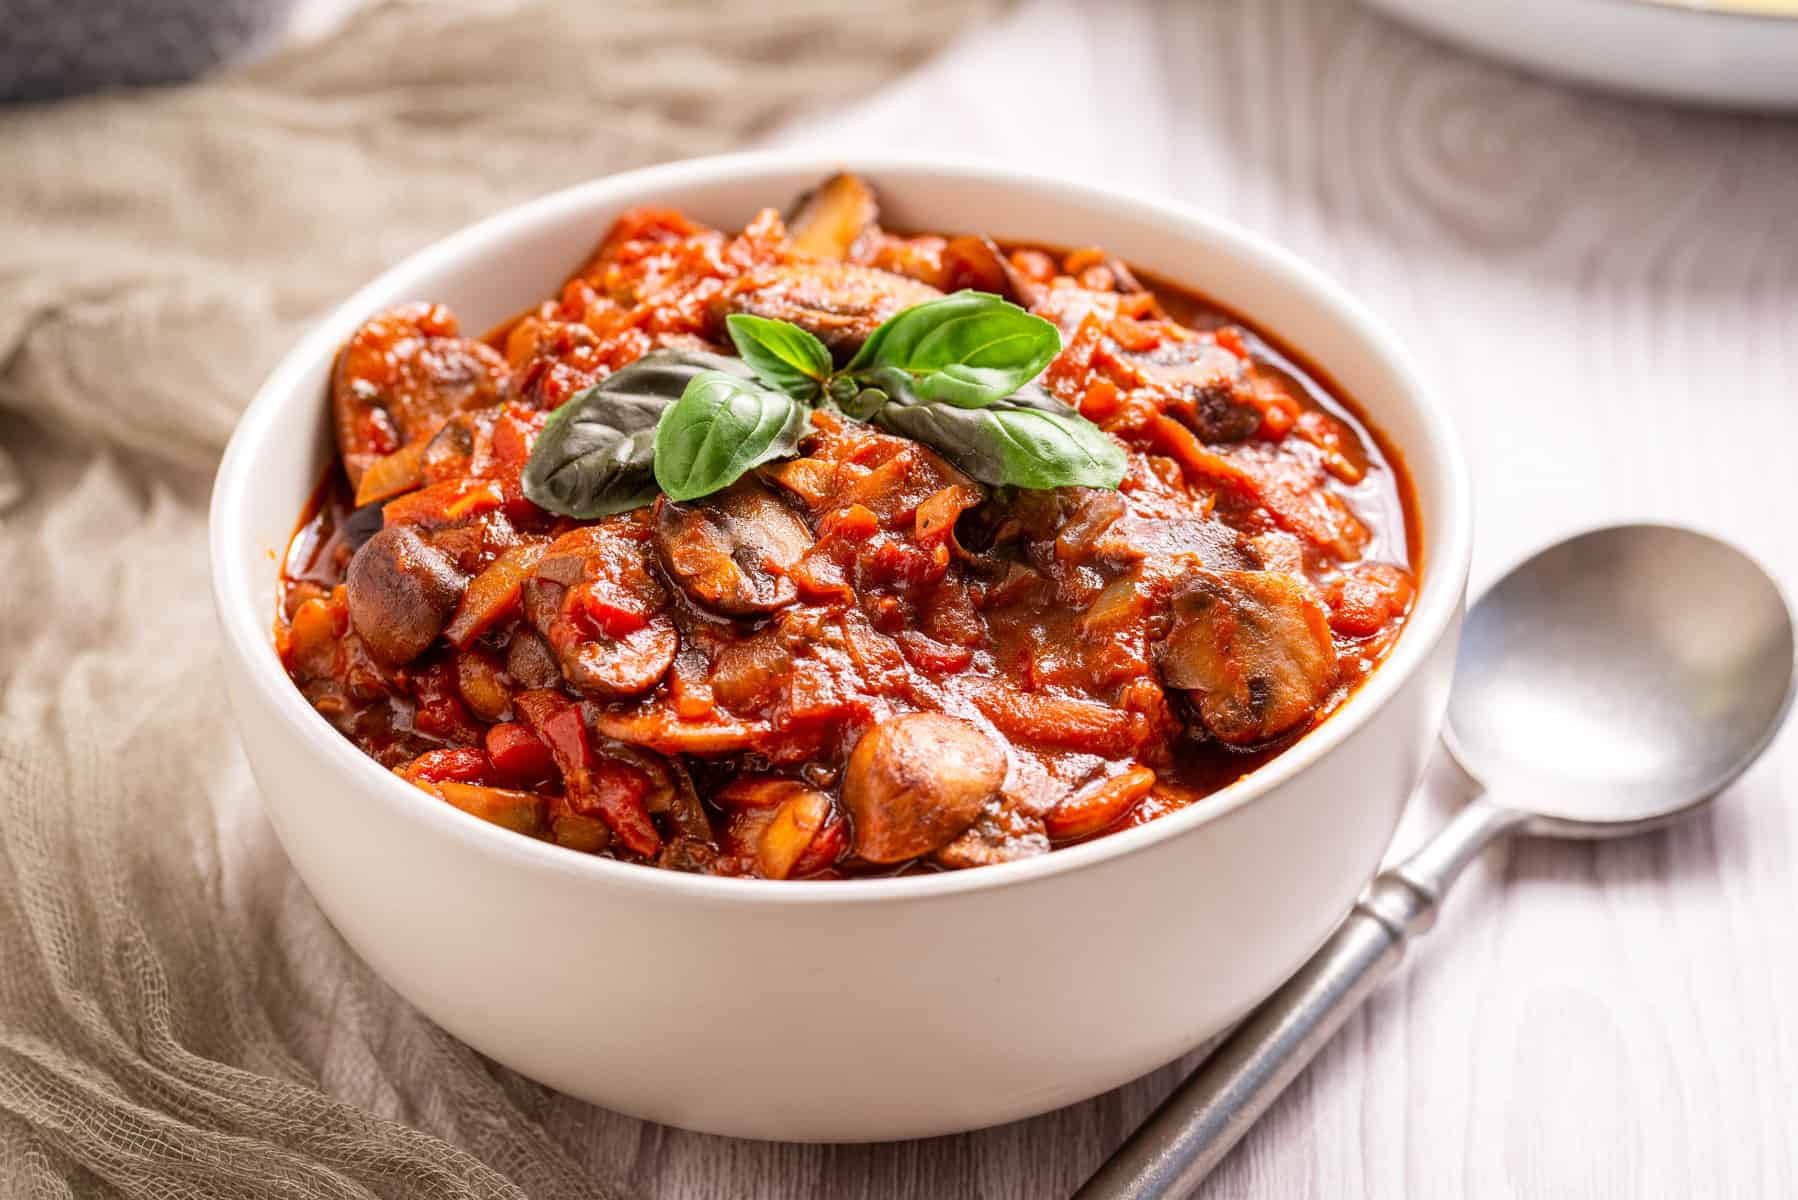 An image of mushroom ragu in a white bowl with a garnish of basil on top.